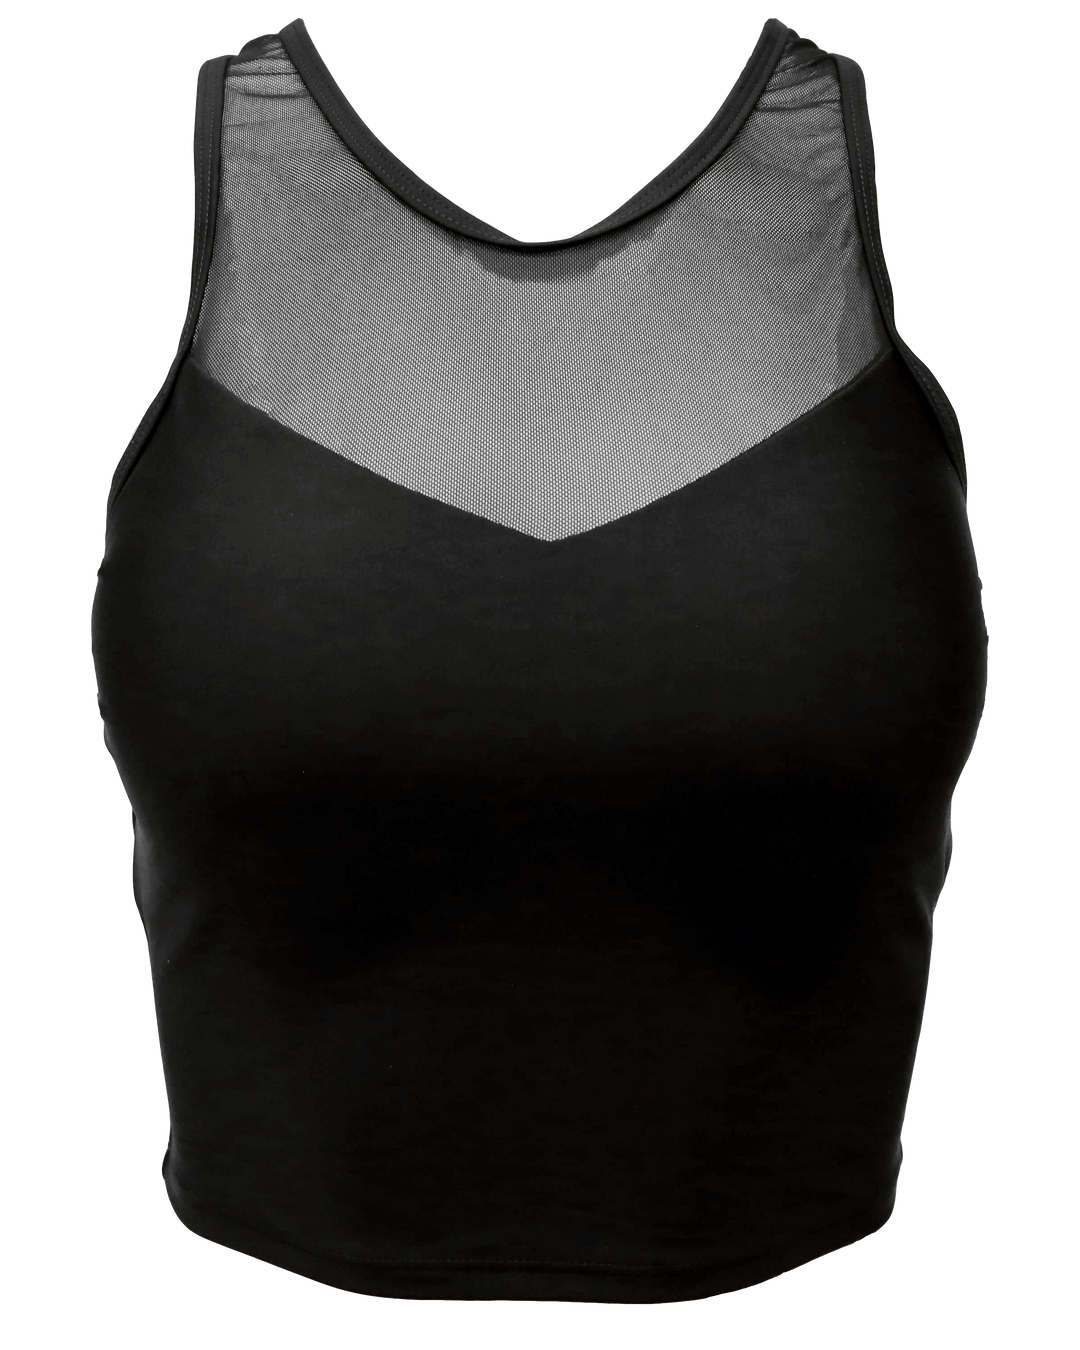 A flat lay image of a black athletic swim top with mesh detailing.